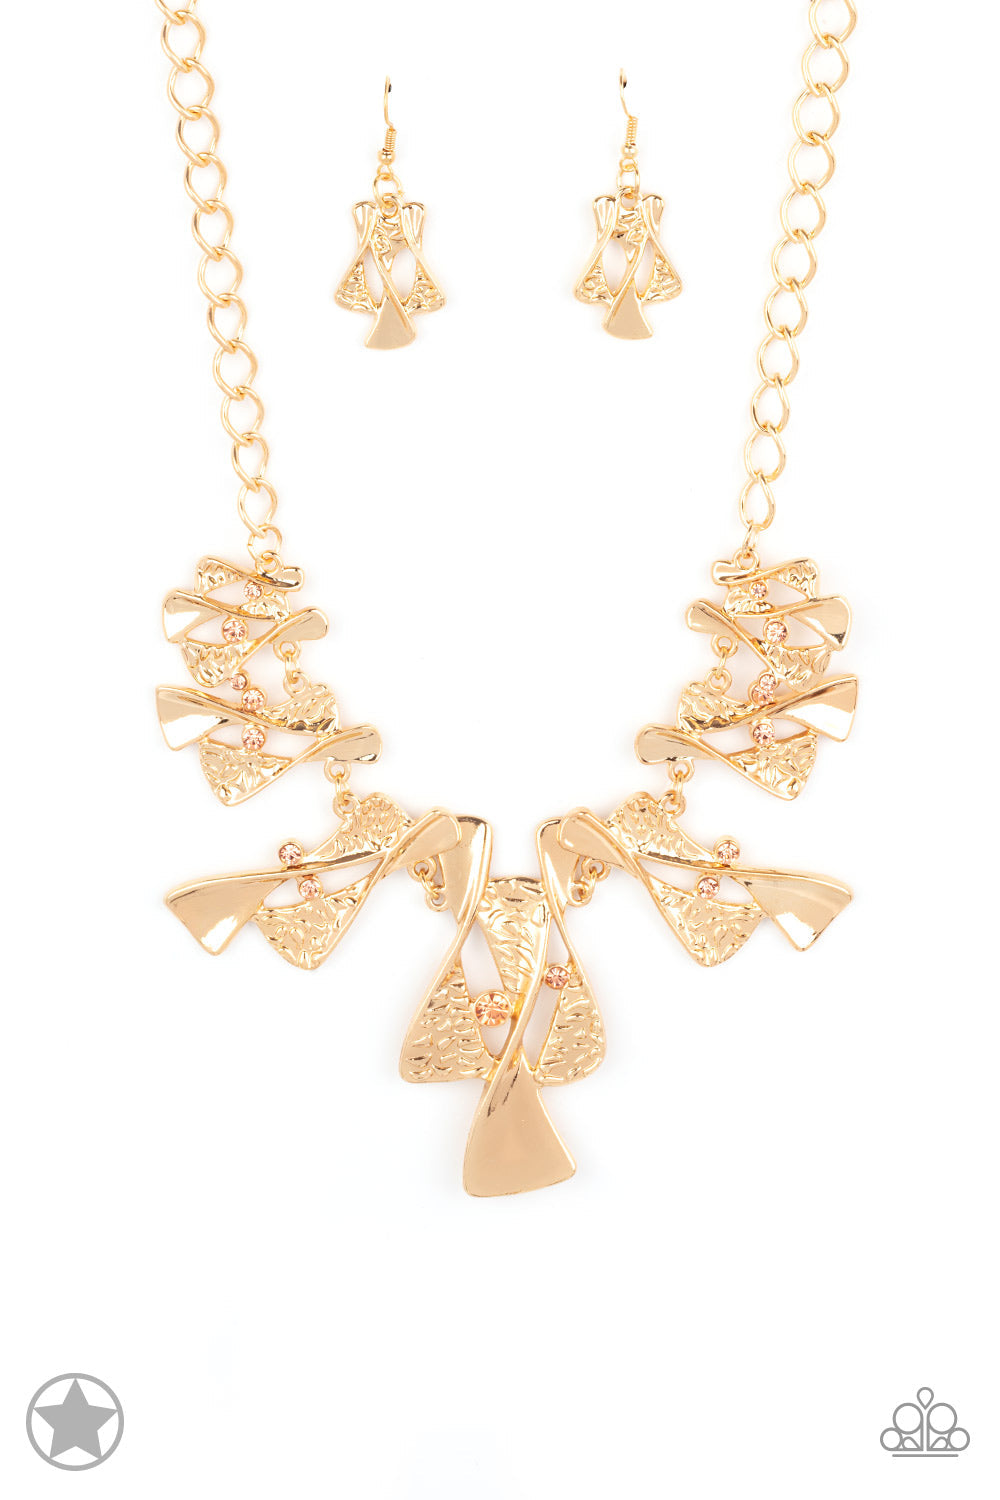 The Sands of Time - Gold - Peach Necklace - Paparazzi Accessories - Twisted gold hourglasses dance along a chunky gold chain with tiny peach rhinestones adding sparkling, elegant accents. The textured pieces add depth to this stylish necklace.